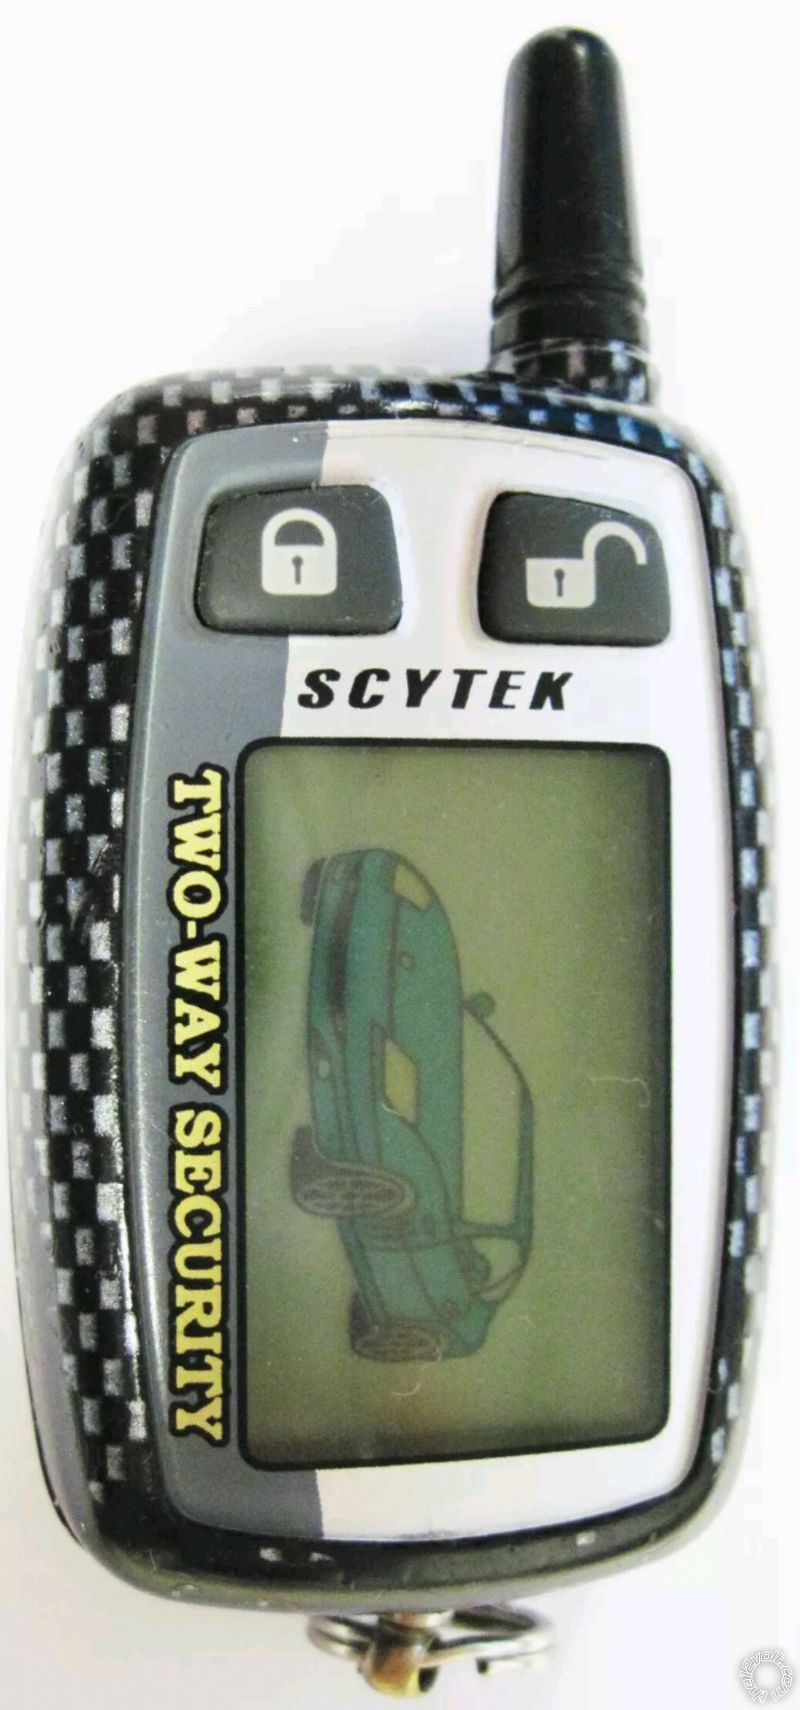 Scytek Remote Replacements -- posted image.